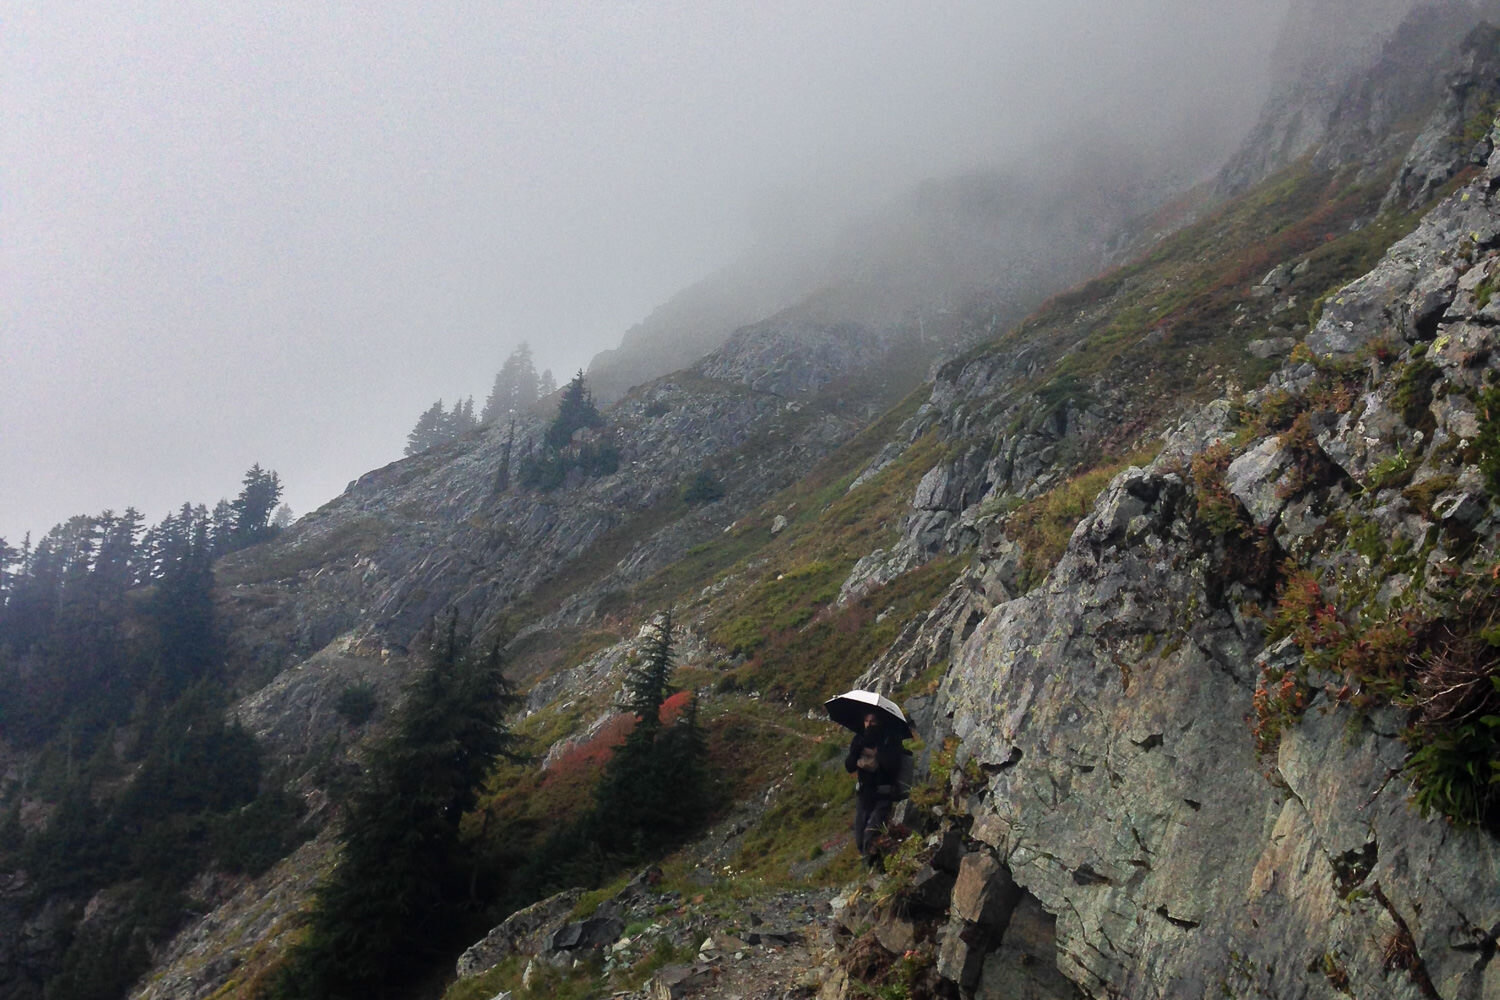 We needed umbrellas and rain gear to survive wet weeks in Washington’s ruggedly beautiful North Cascades